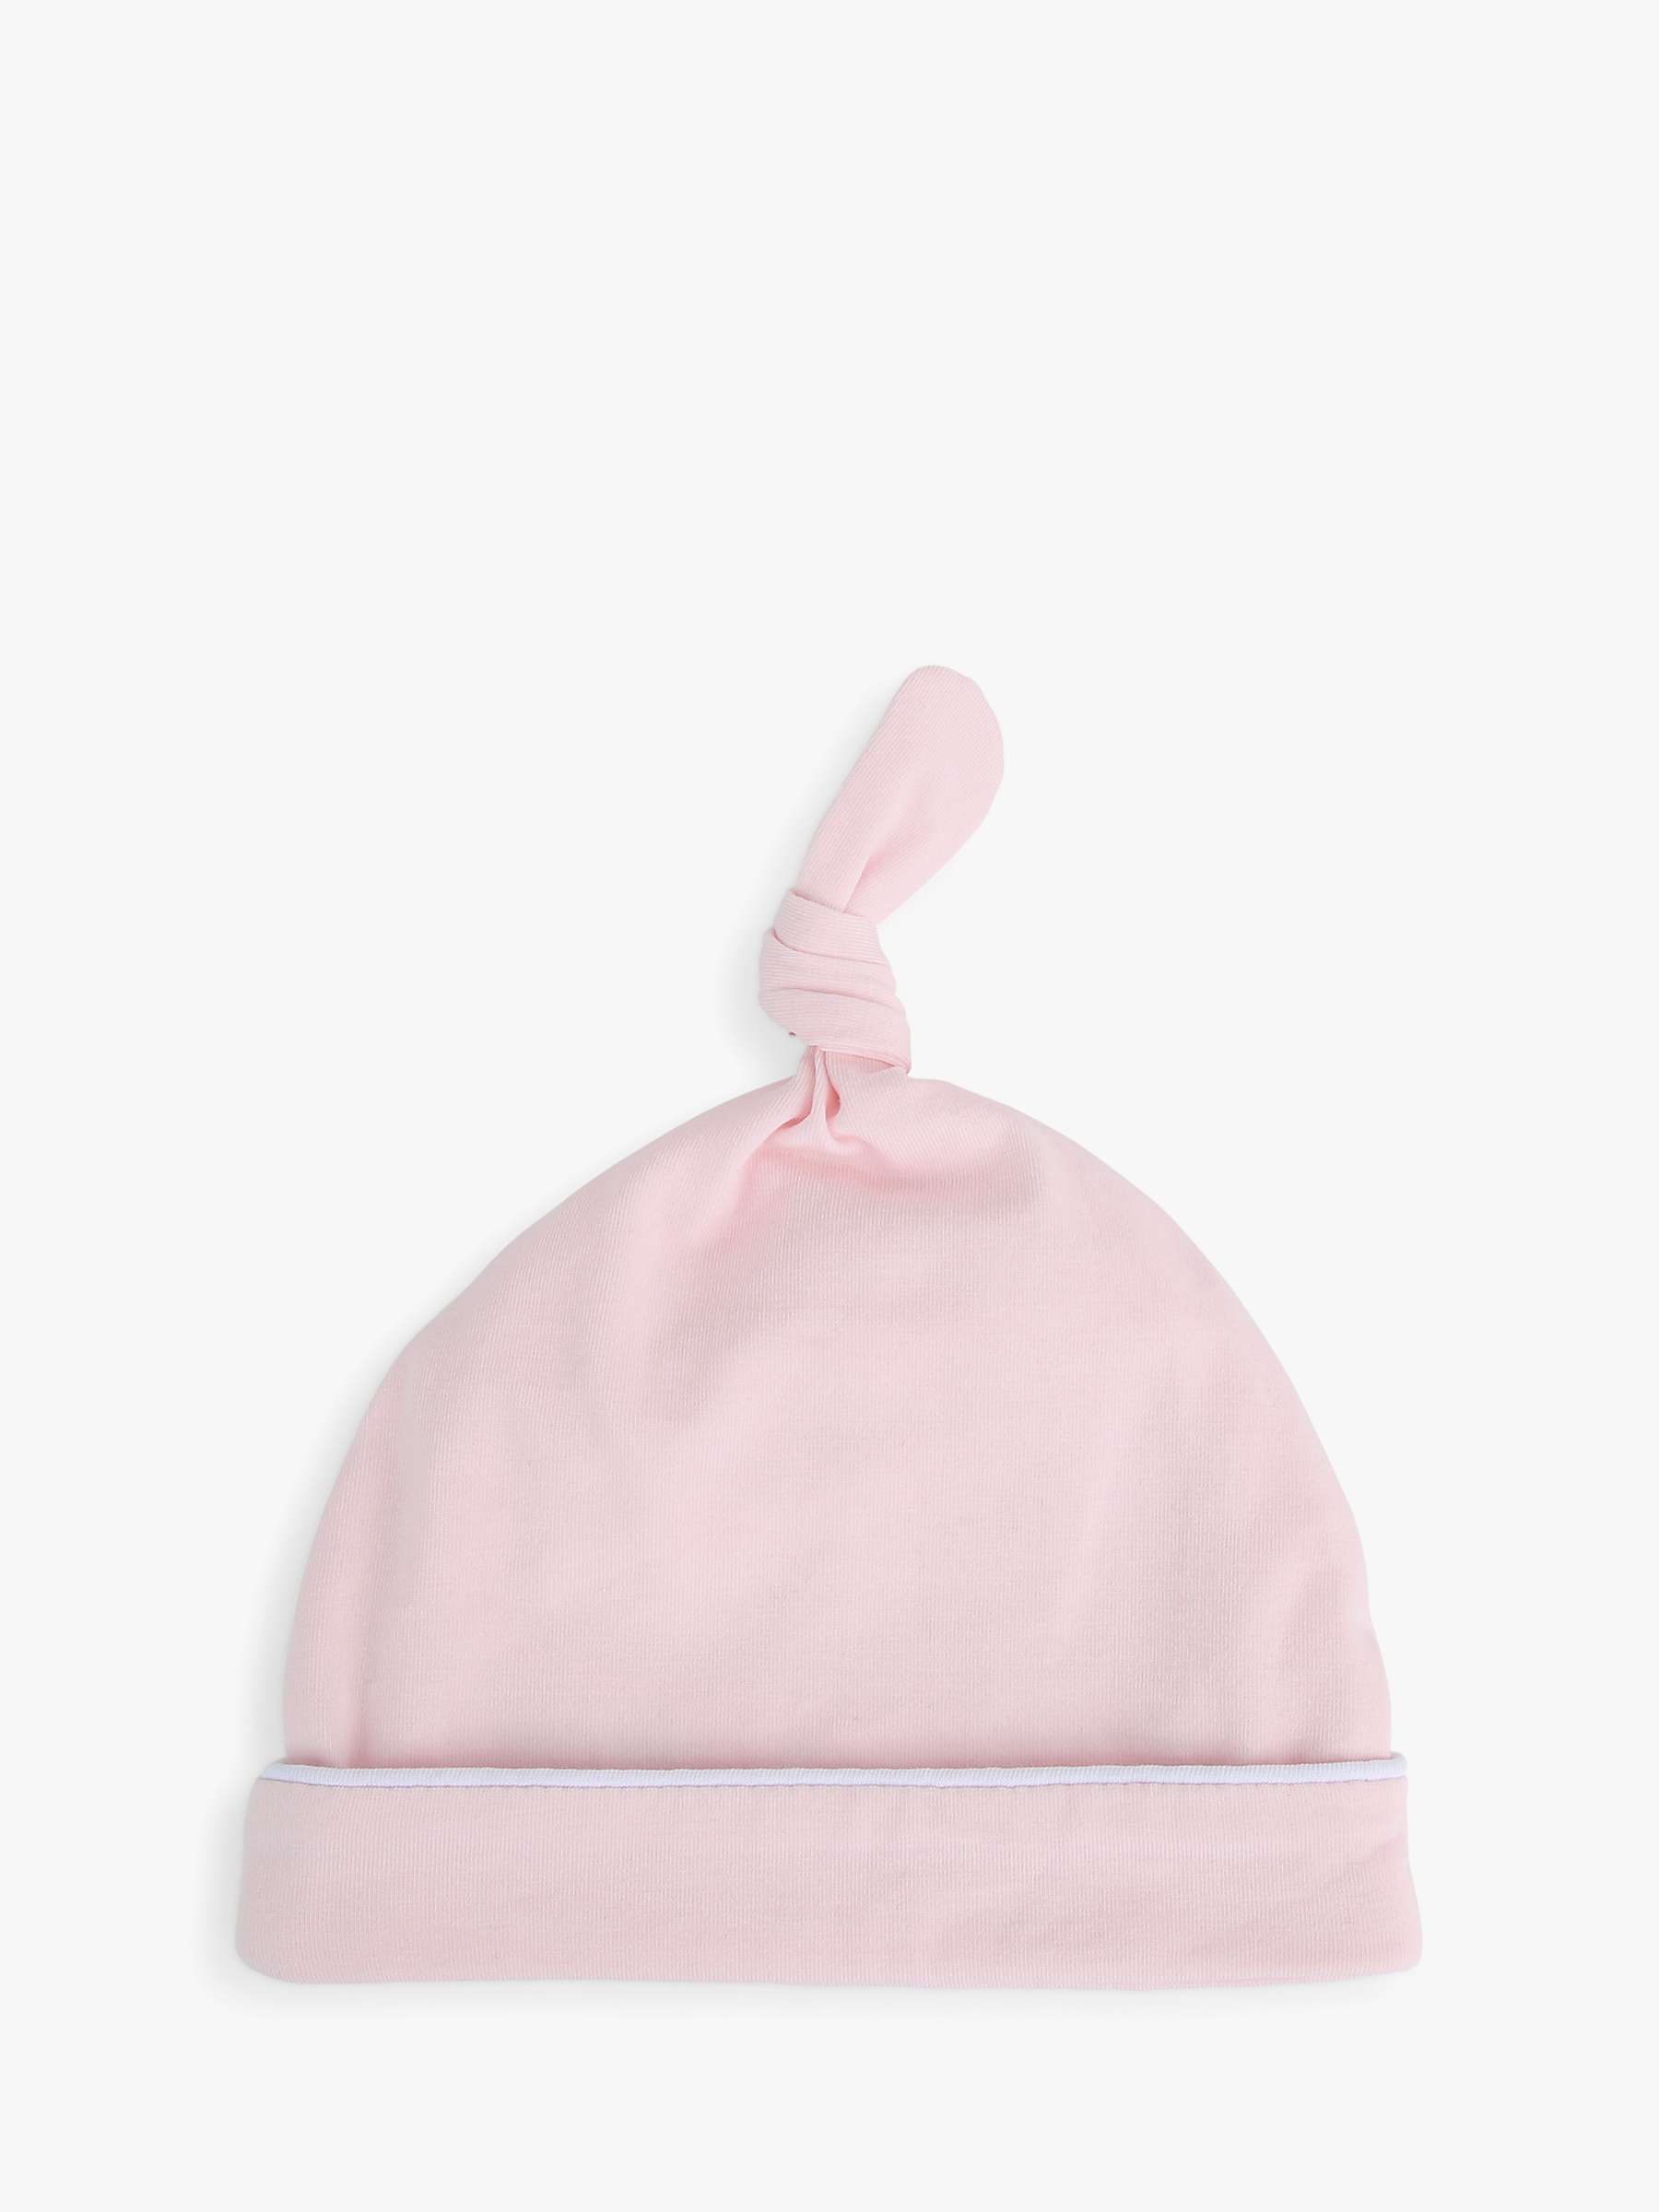 Buy BOSS Baby Cotton Blend Pull On Hat, Pink Online at johnlewis.com